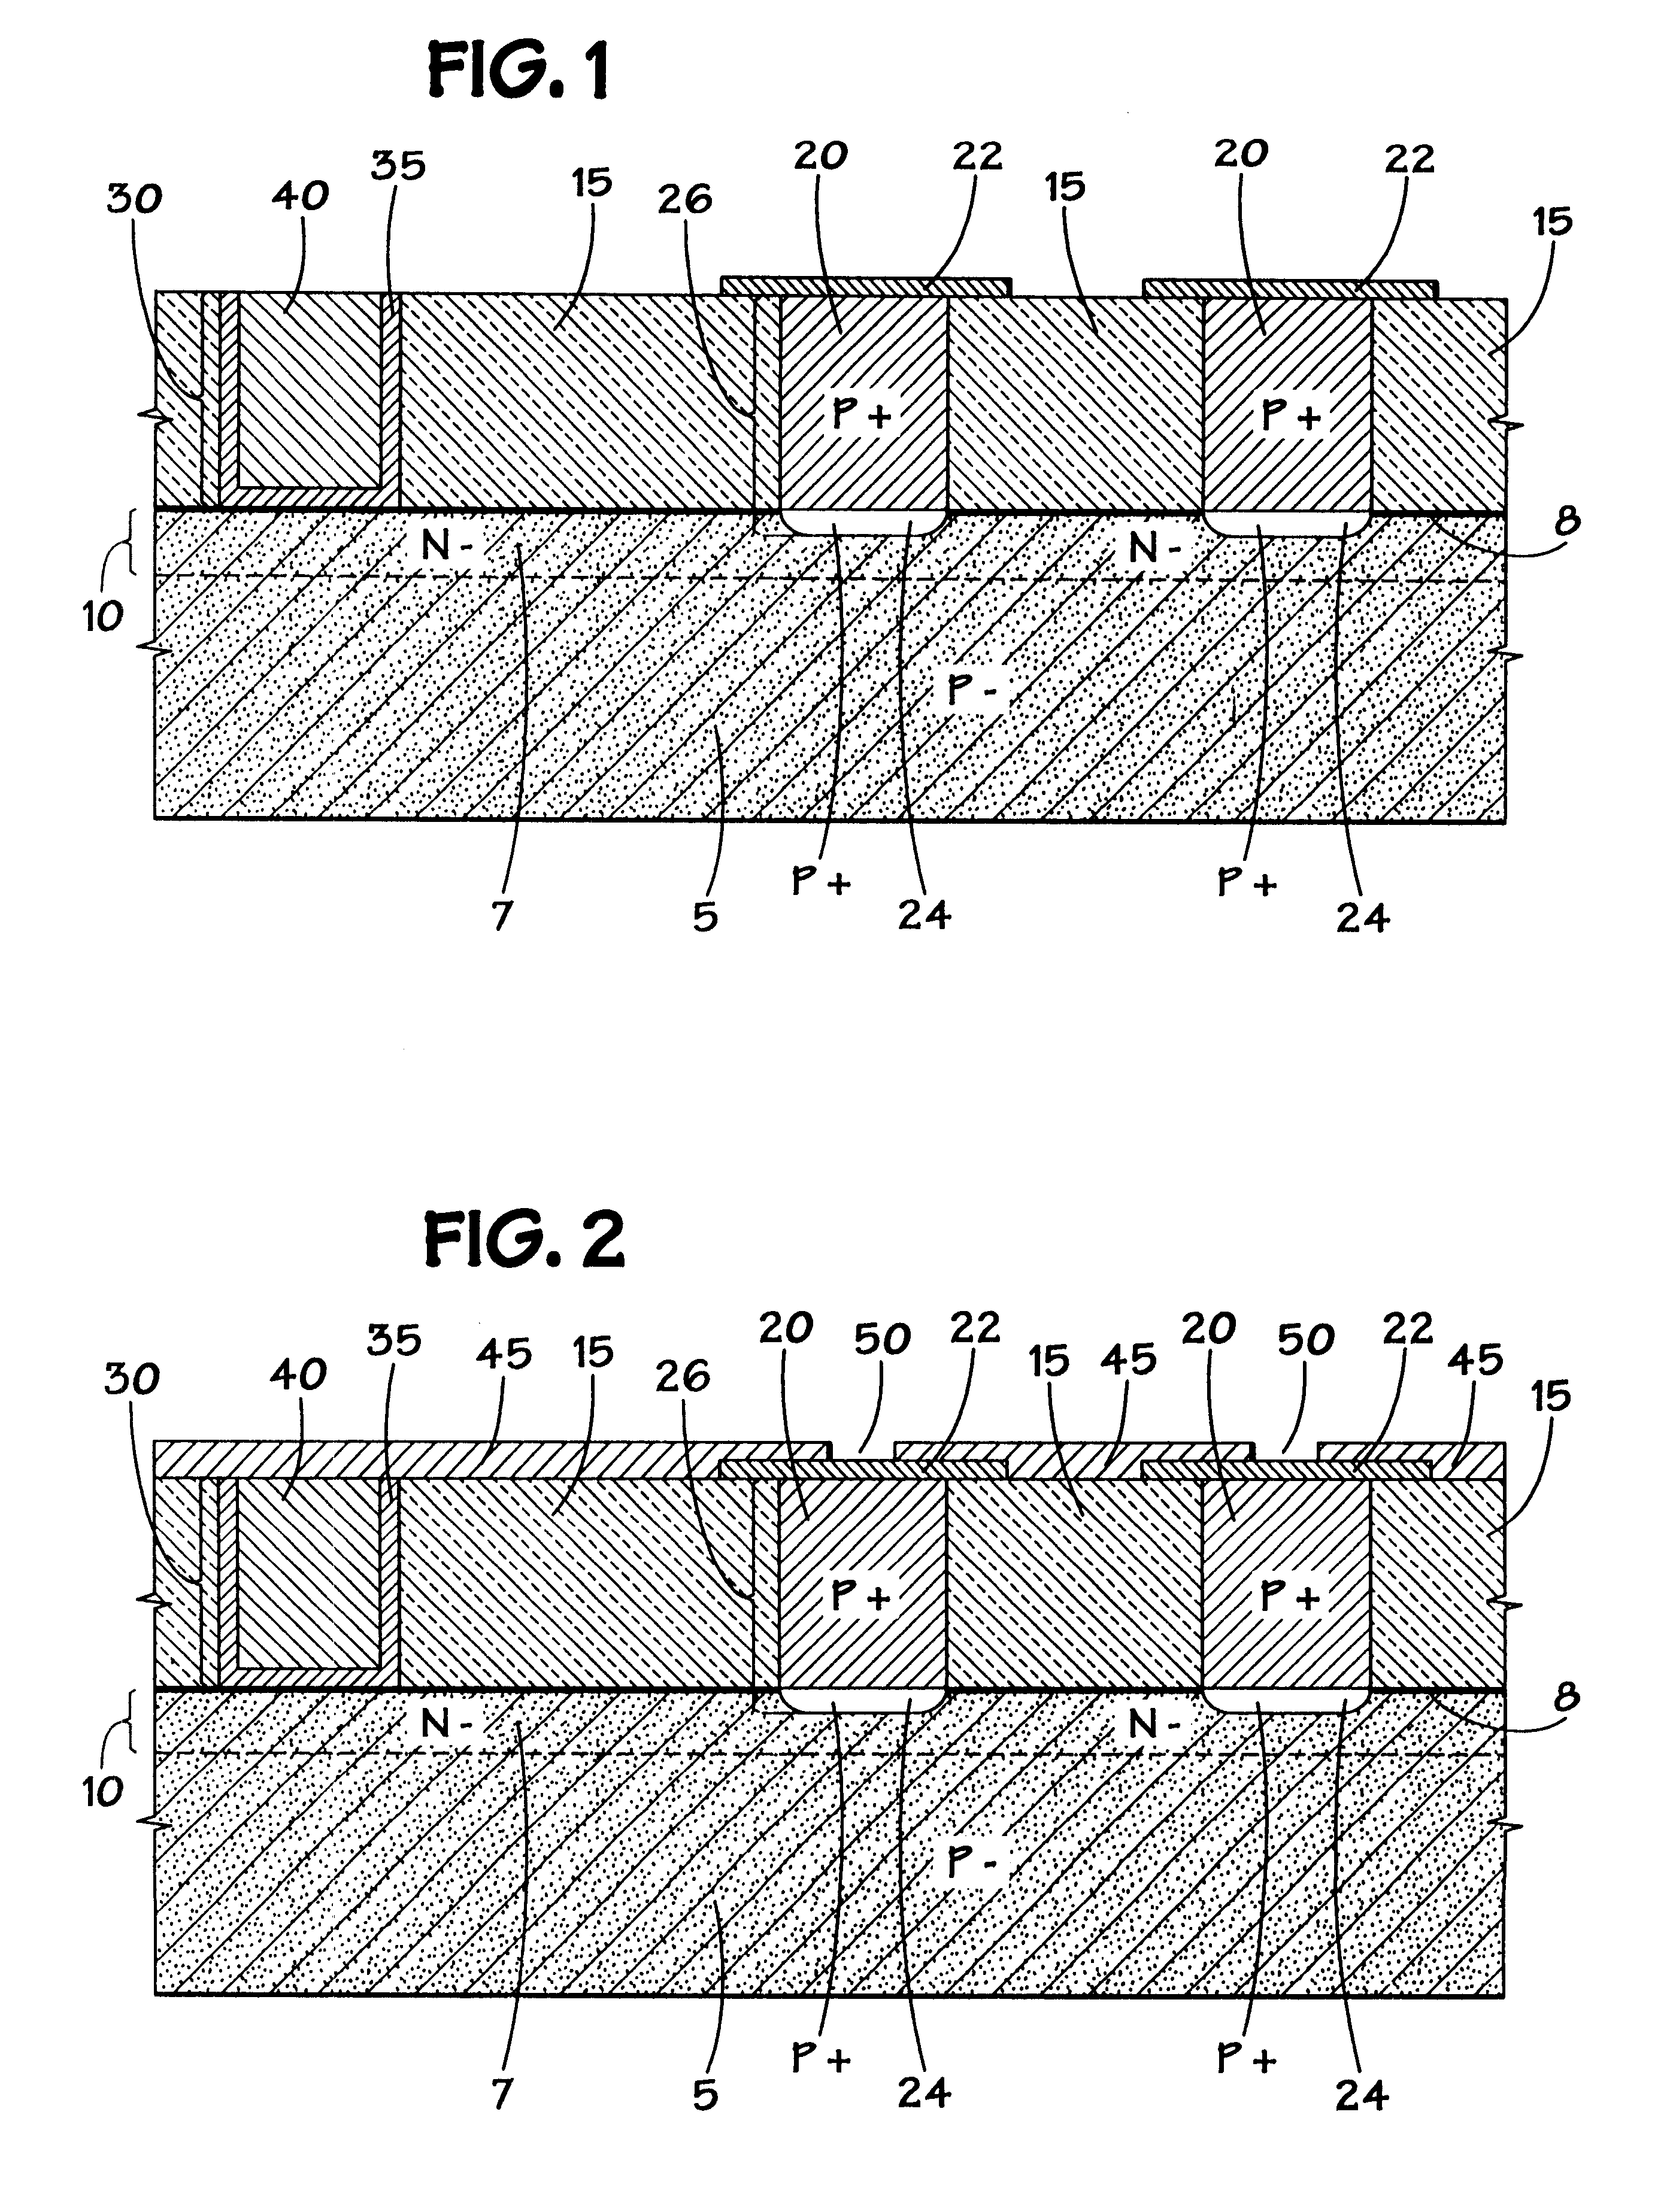 Memory cell incorporating a chalcogenide element and method of making same